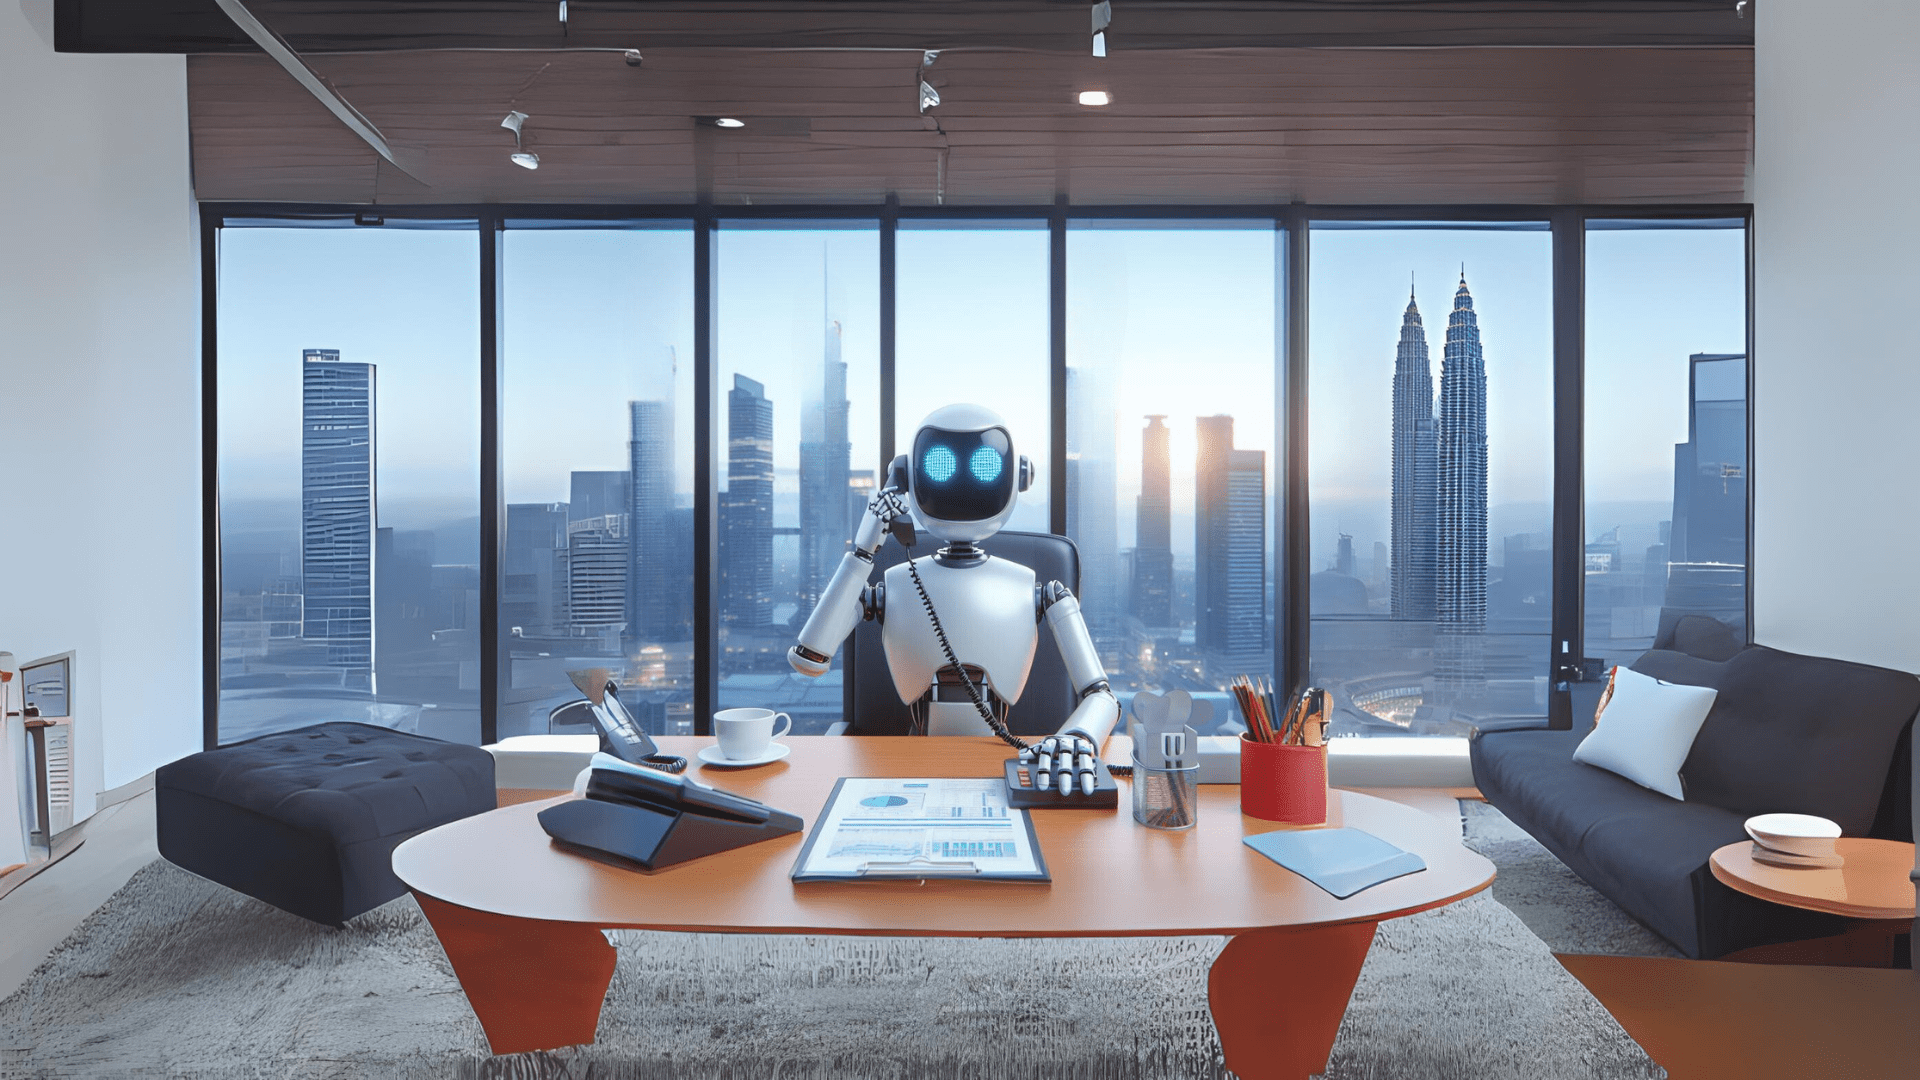 A customer service robot chatbot answering phone call in a office in malaysia with KLCC view.